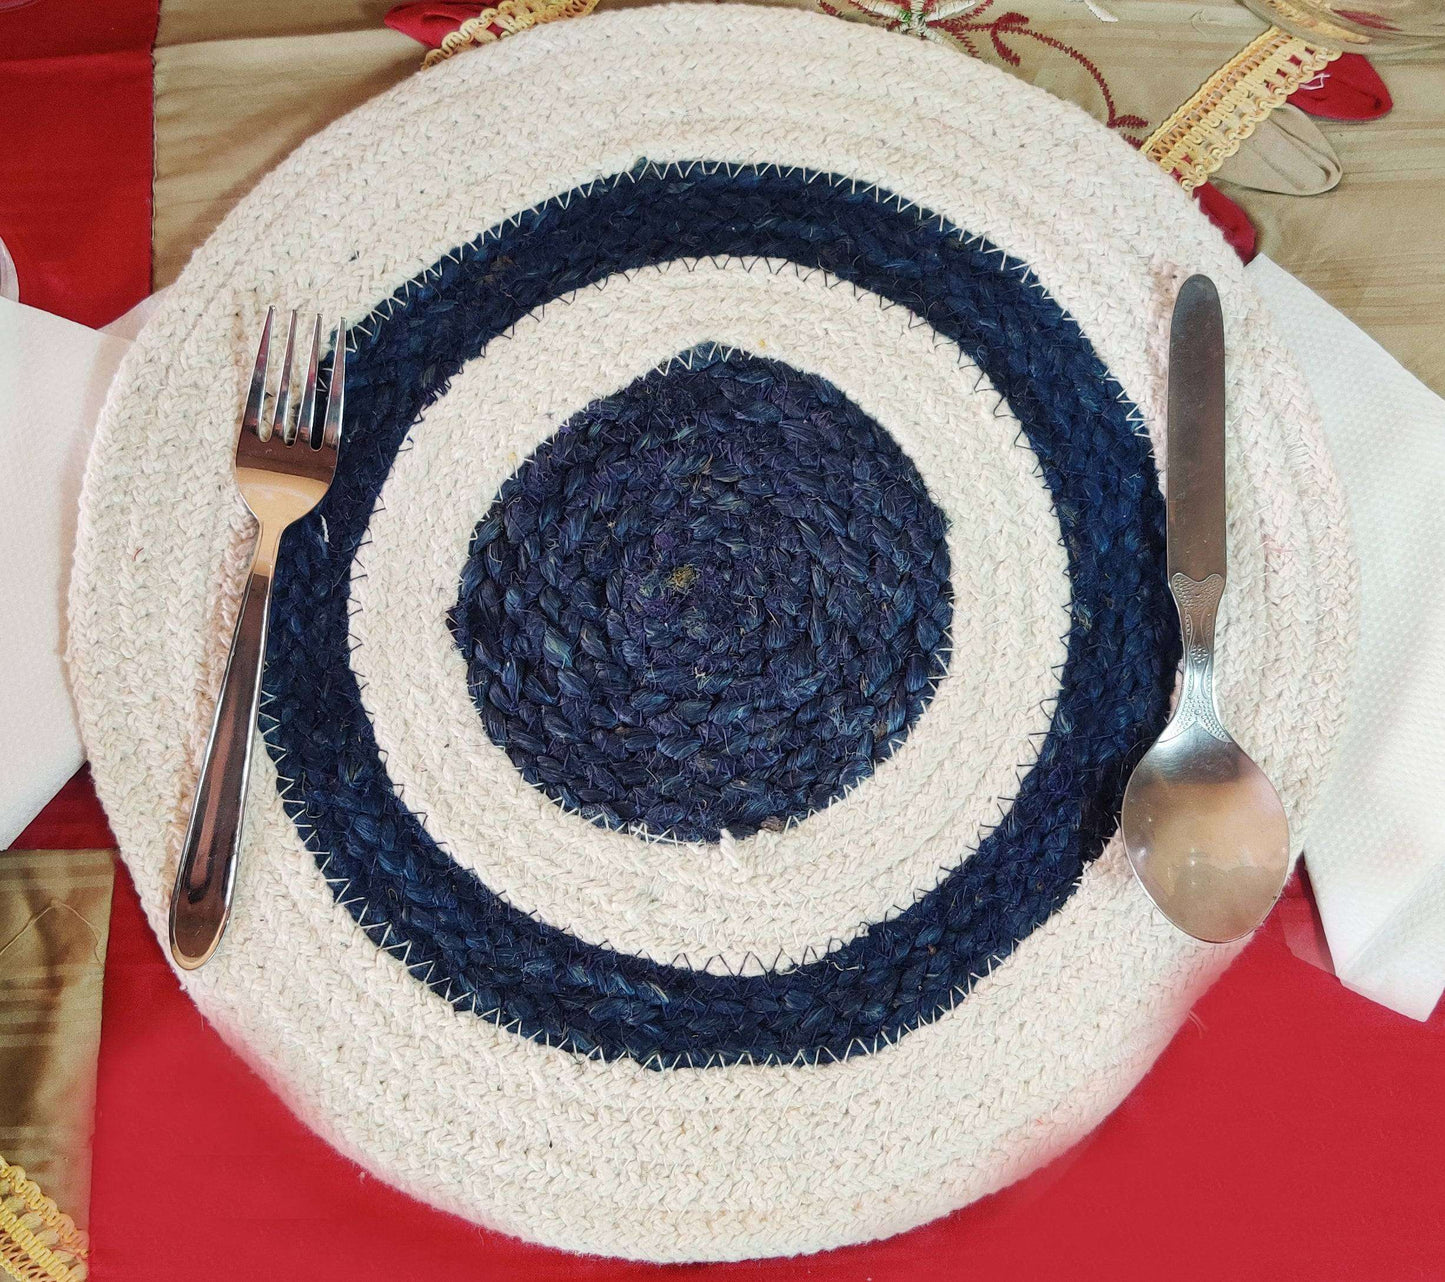 White & Blue Dinning Tablemat (Set of 4)